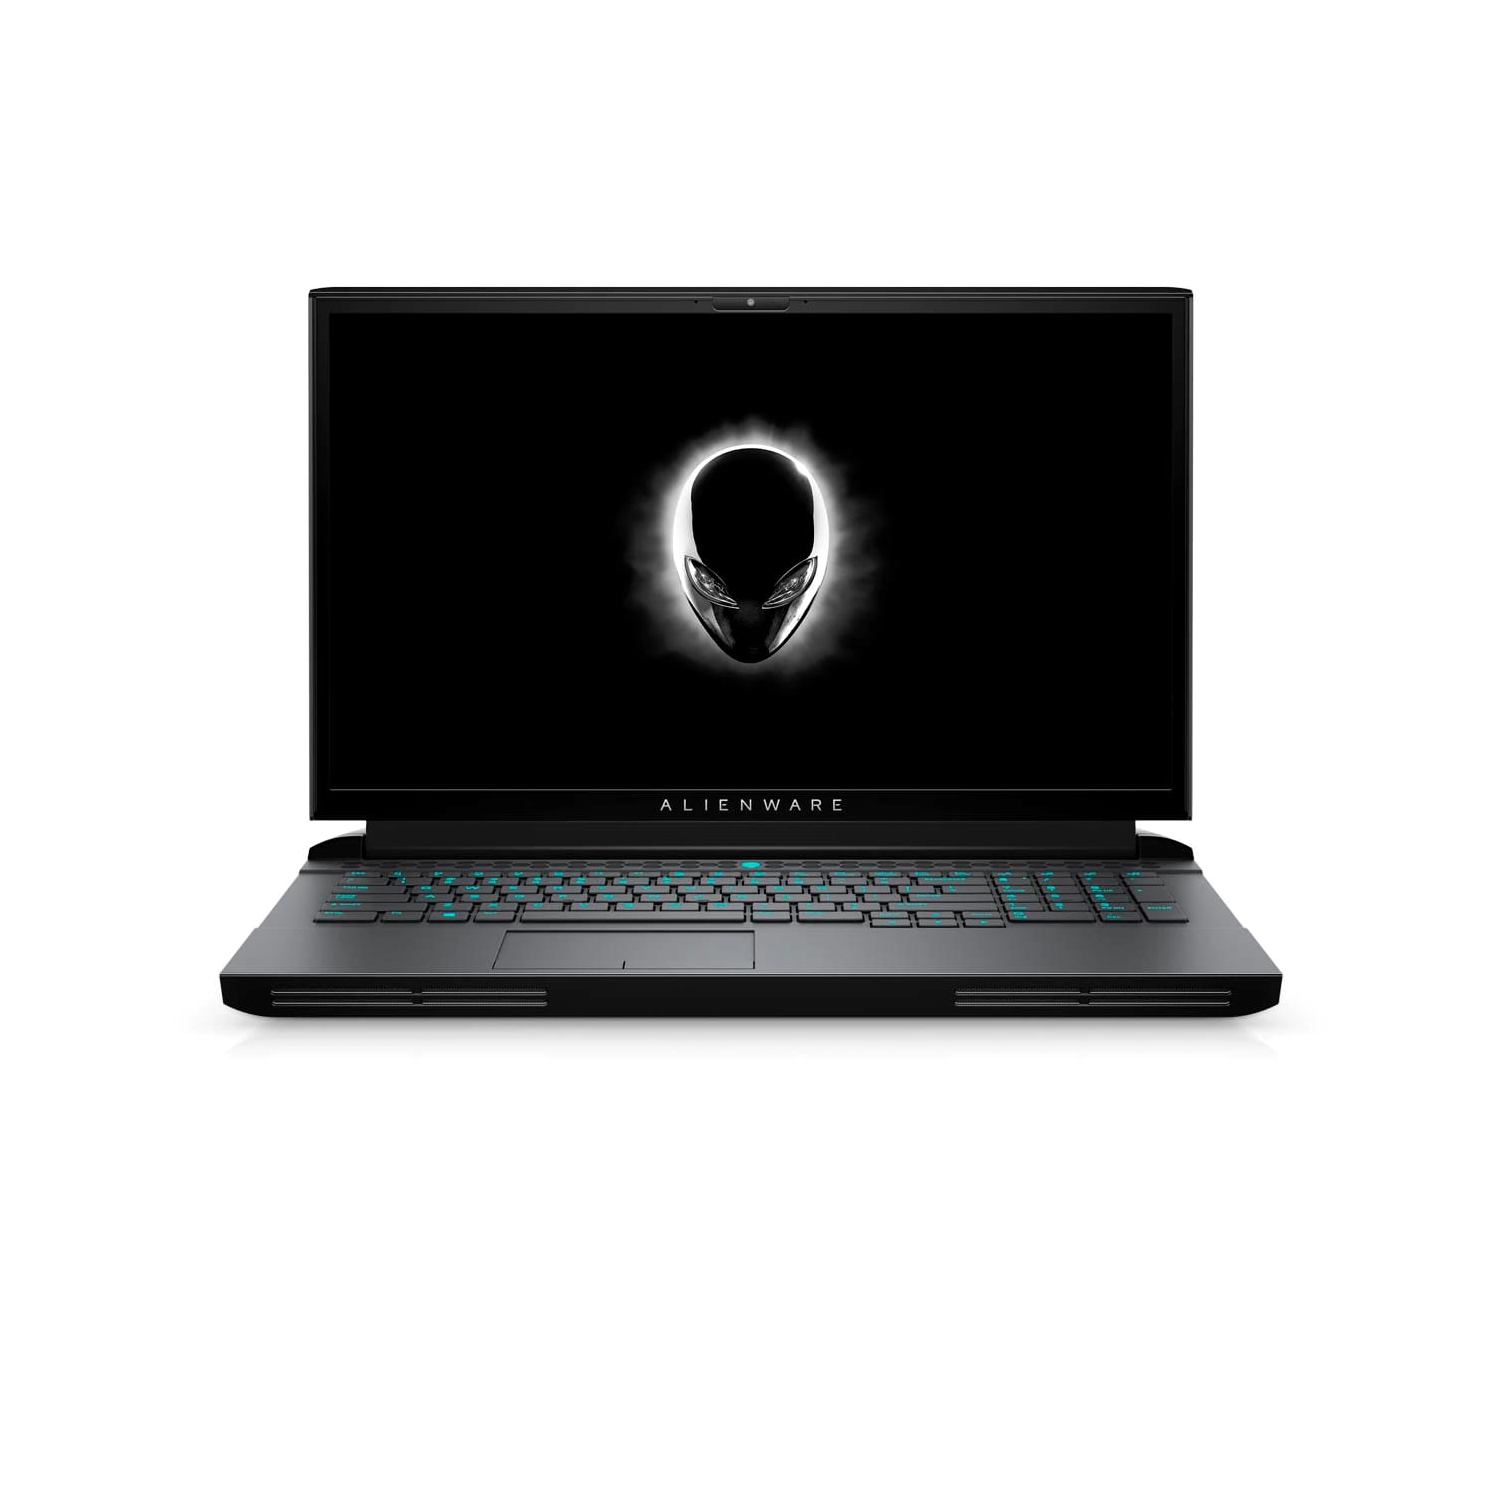 Refurbished (Excellent) - Dell Alienware 17 51m R2 Gaming Laptop (2020), 17.3" FHD, Core i7, 1TB HDD + 512GB SSD, 32GB RAM, 2070 Super, 5.1 GHz, 10th Gen CPU Certified